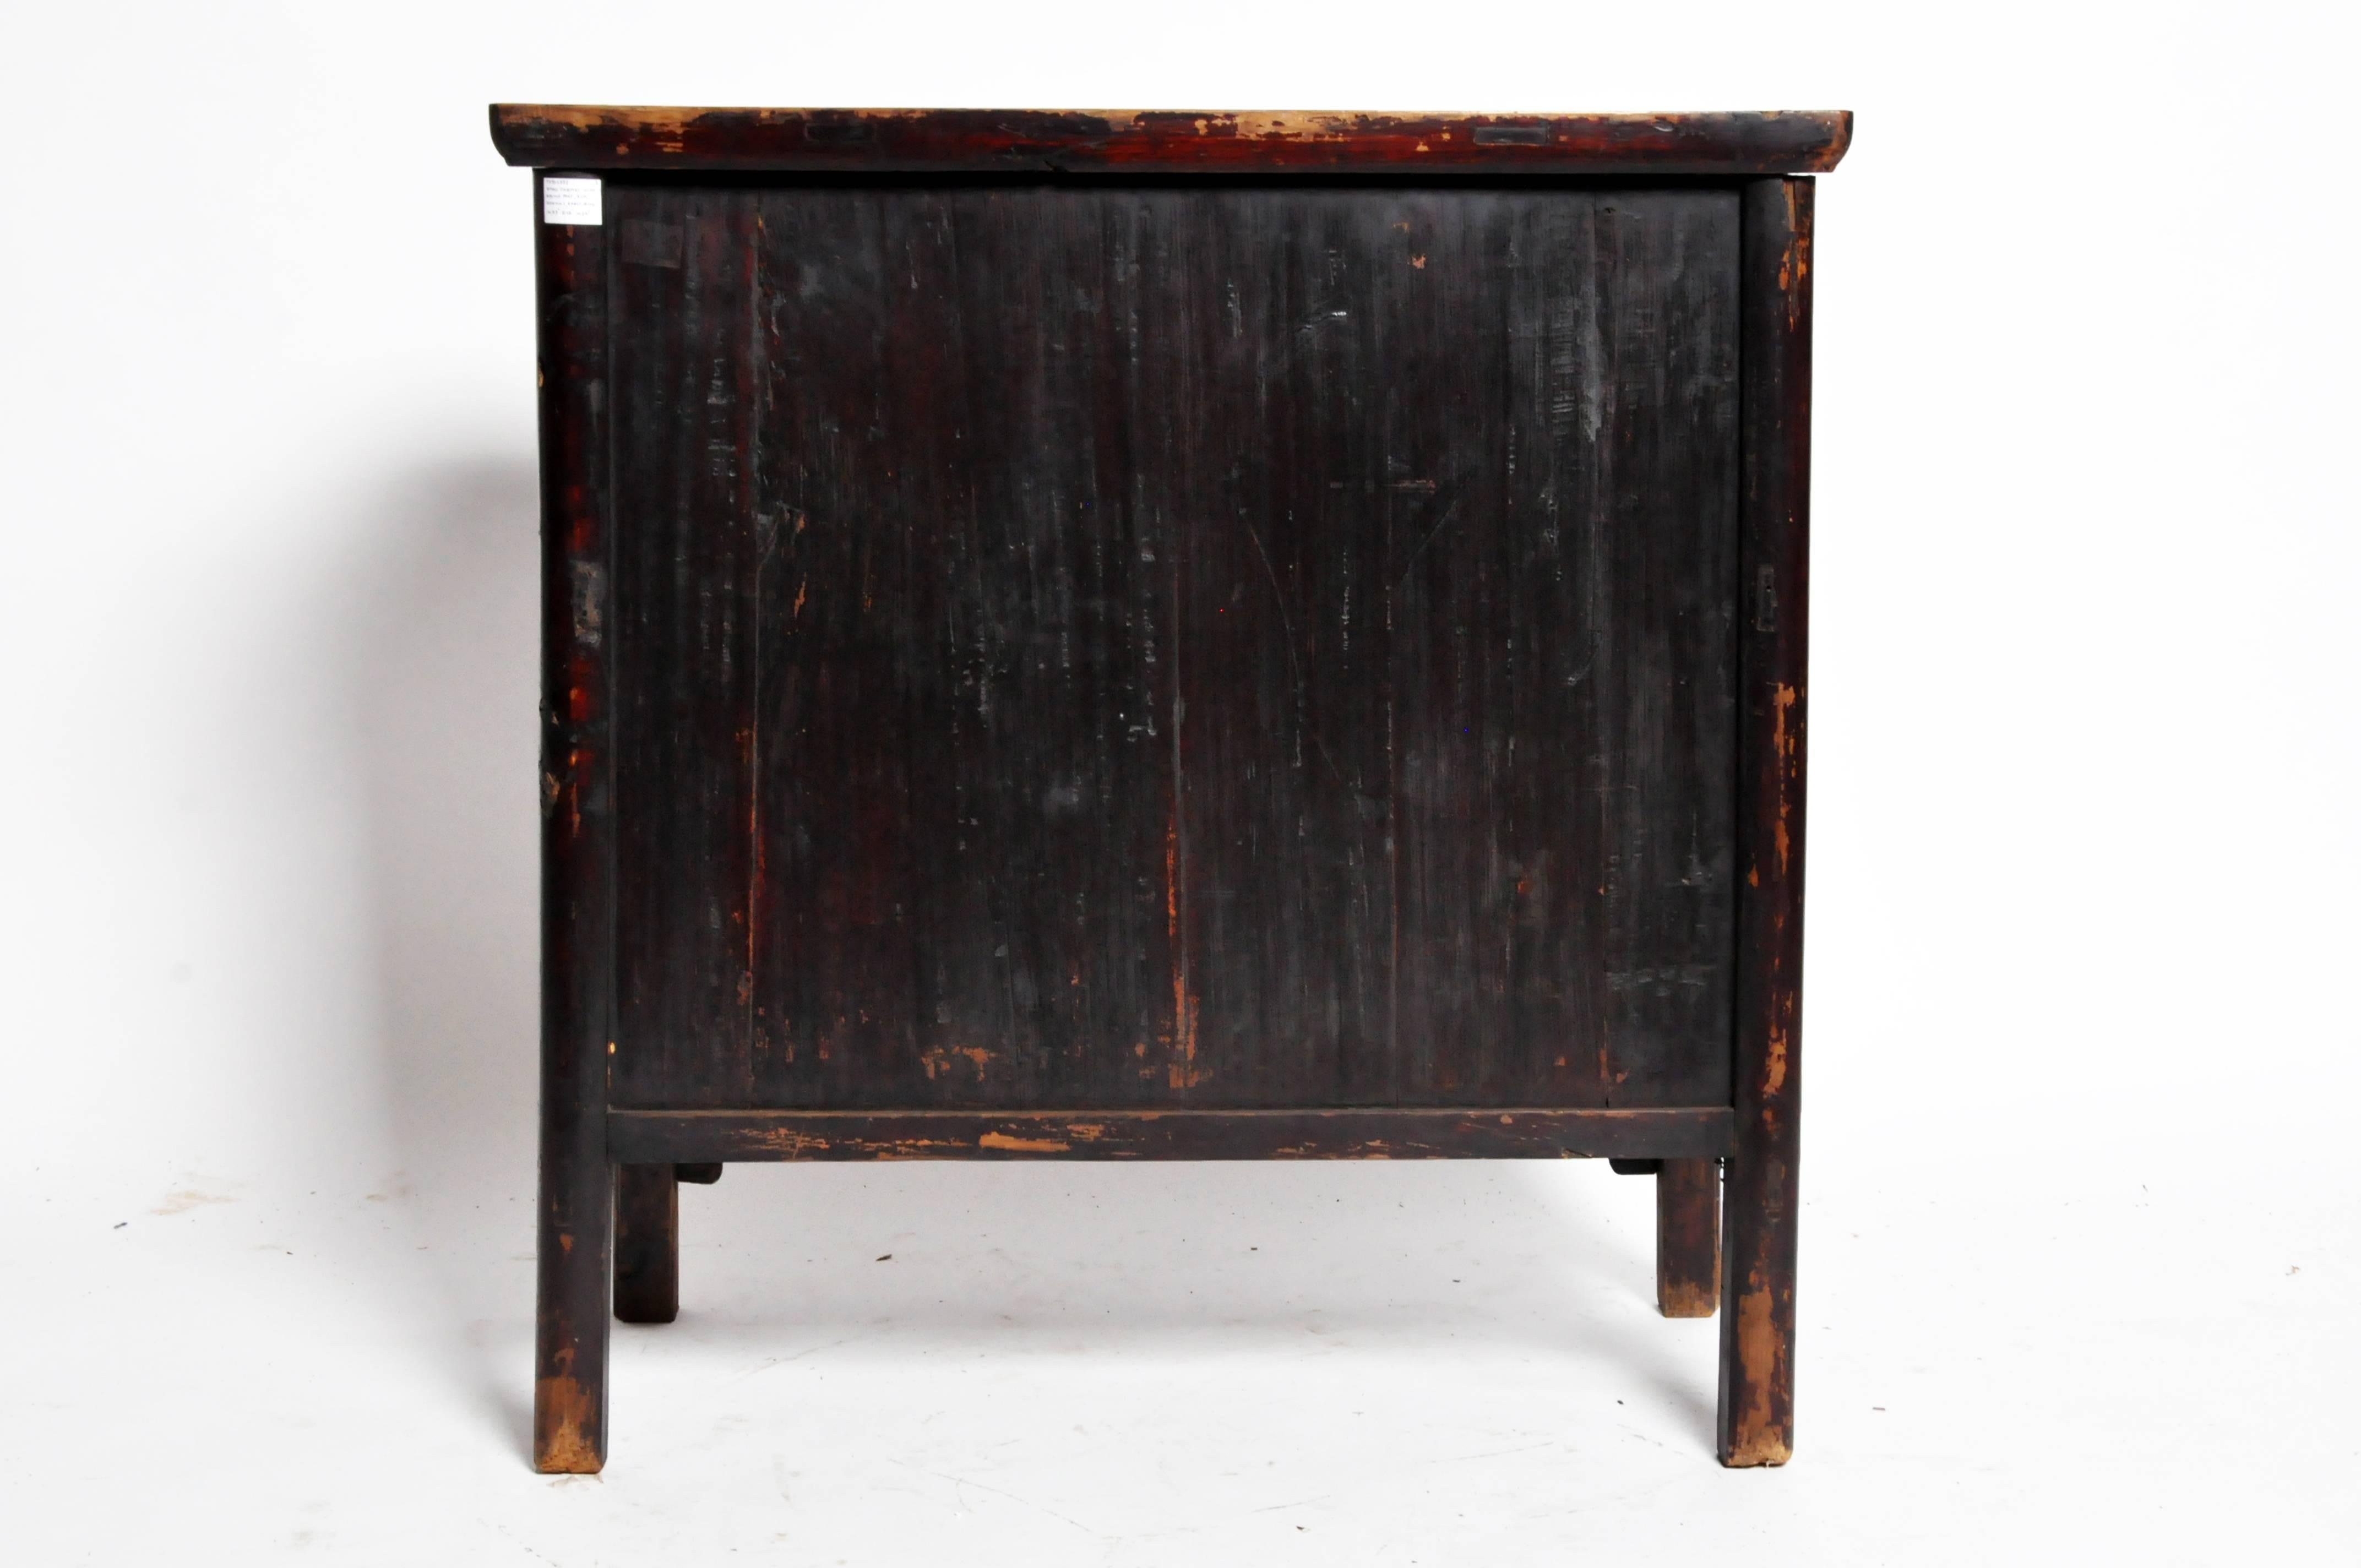 This Chinese round post chest is from the early Qing dynasty and is made from elmwood. It features two drawers and its beautifully aged original patina.